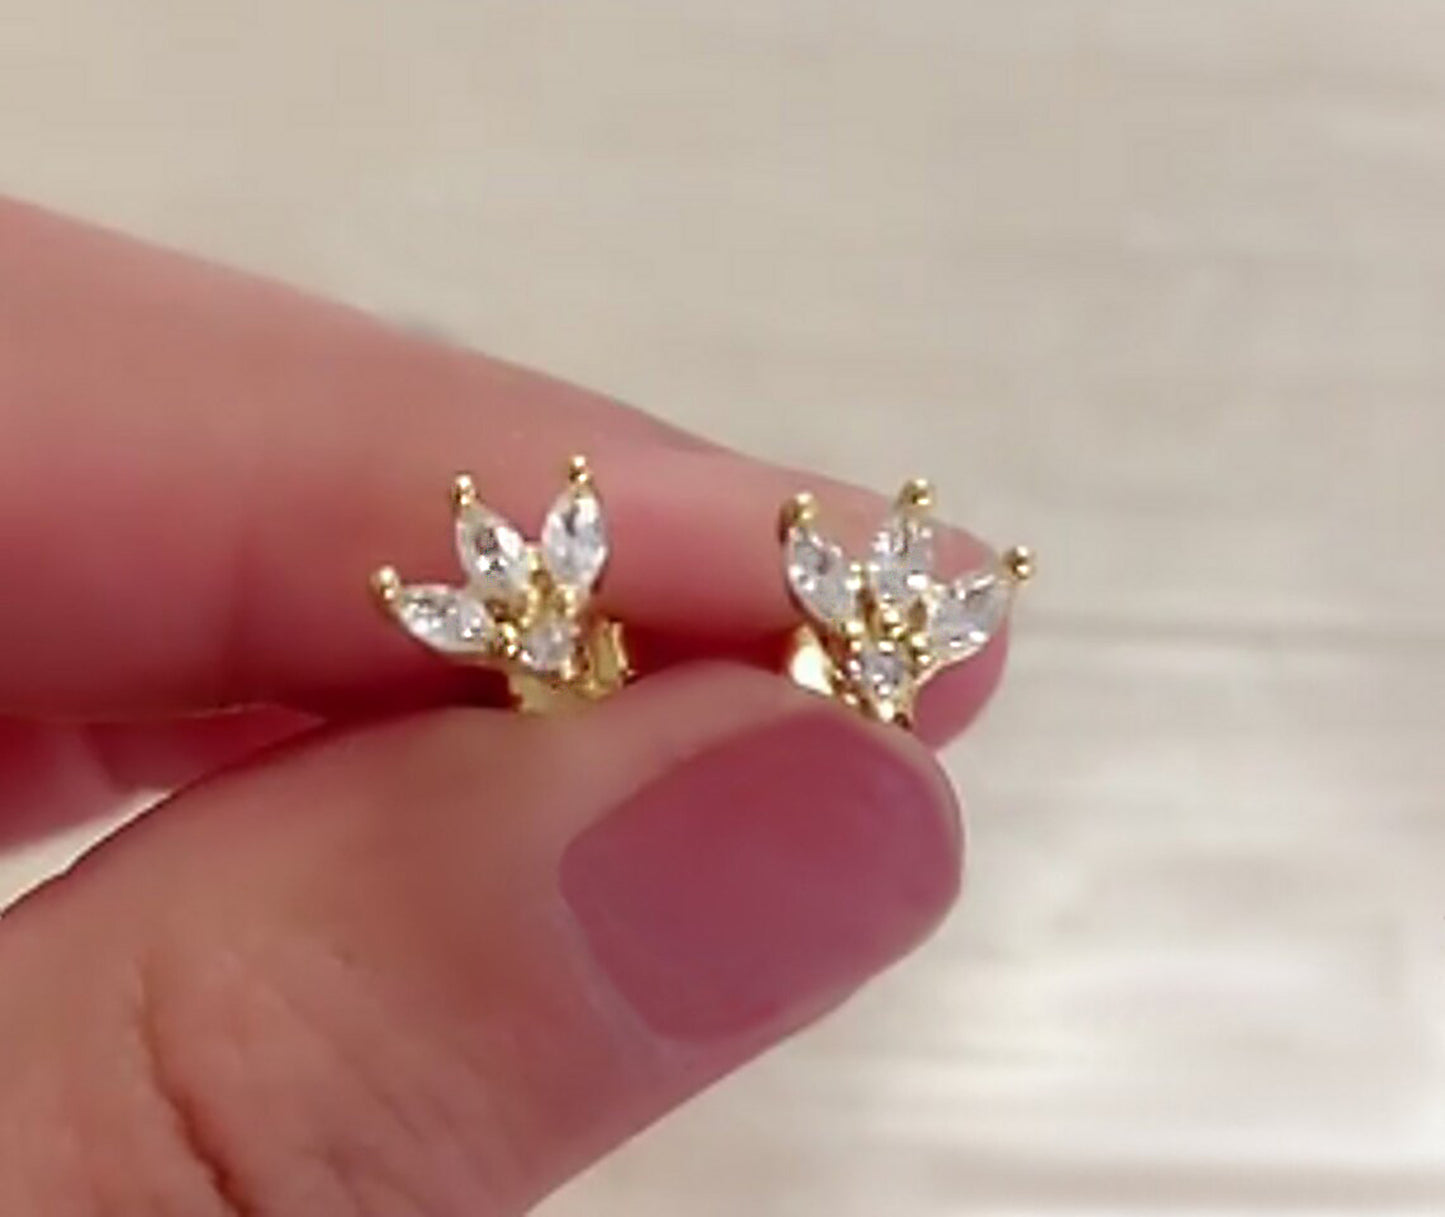 A pair of gold cz earrings held between two manicured fingers to display the features of the earrings.